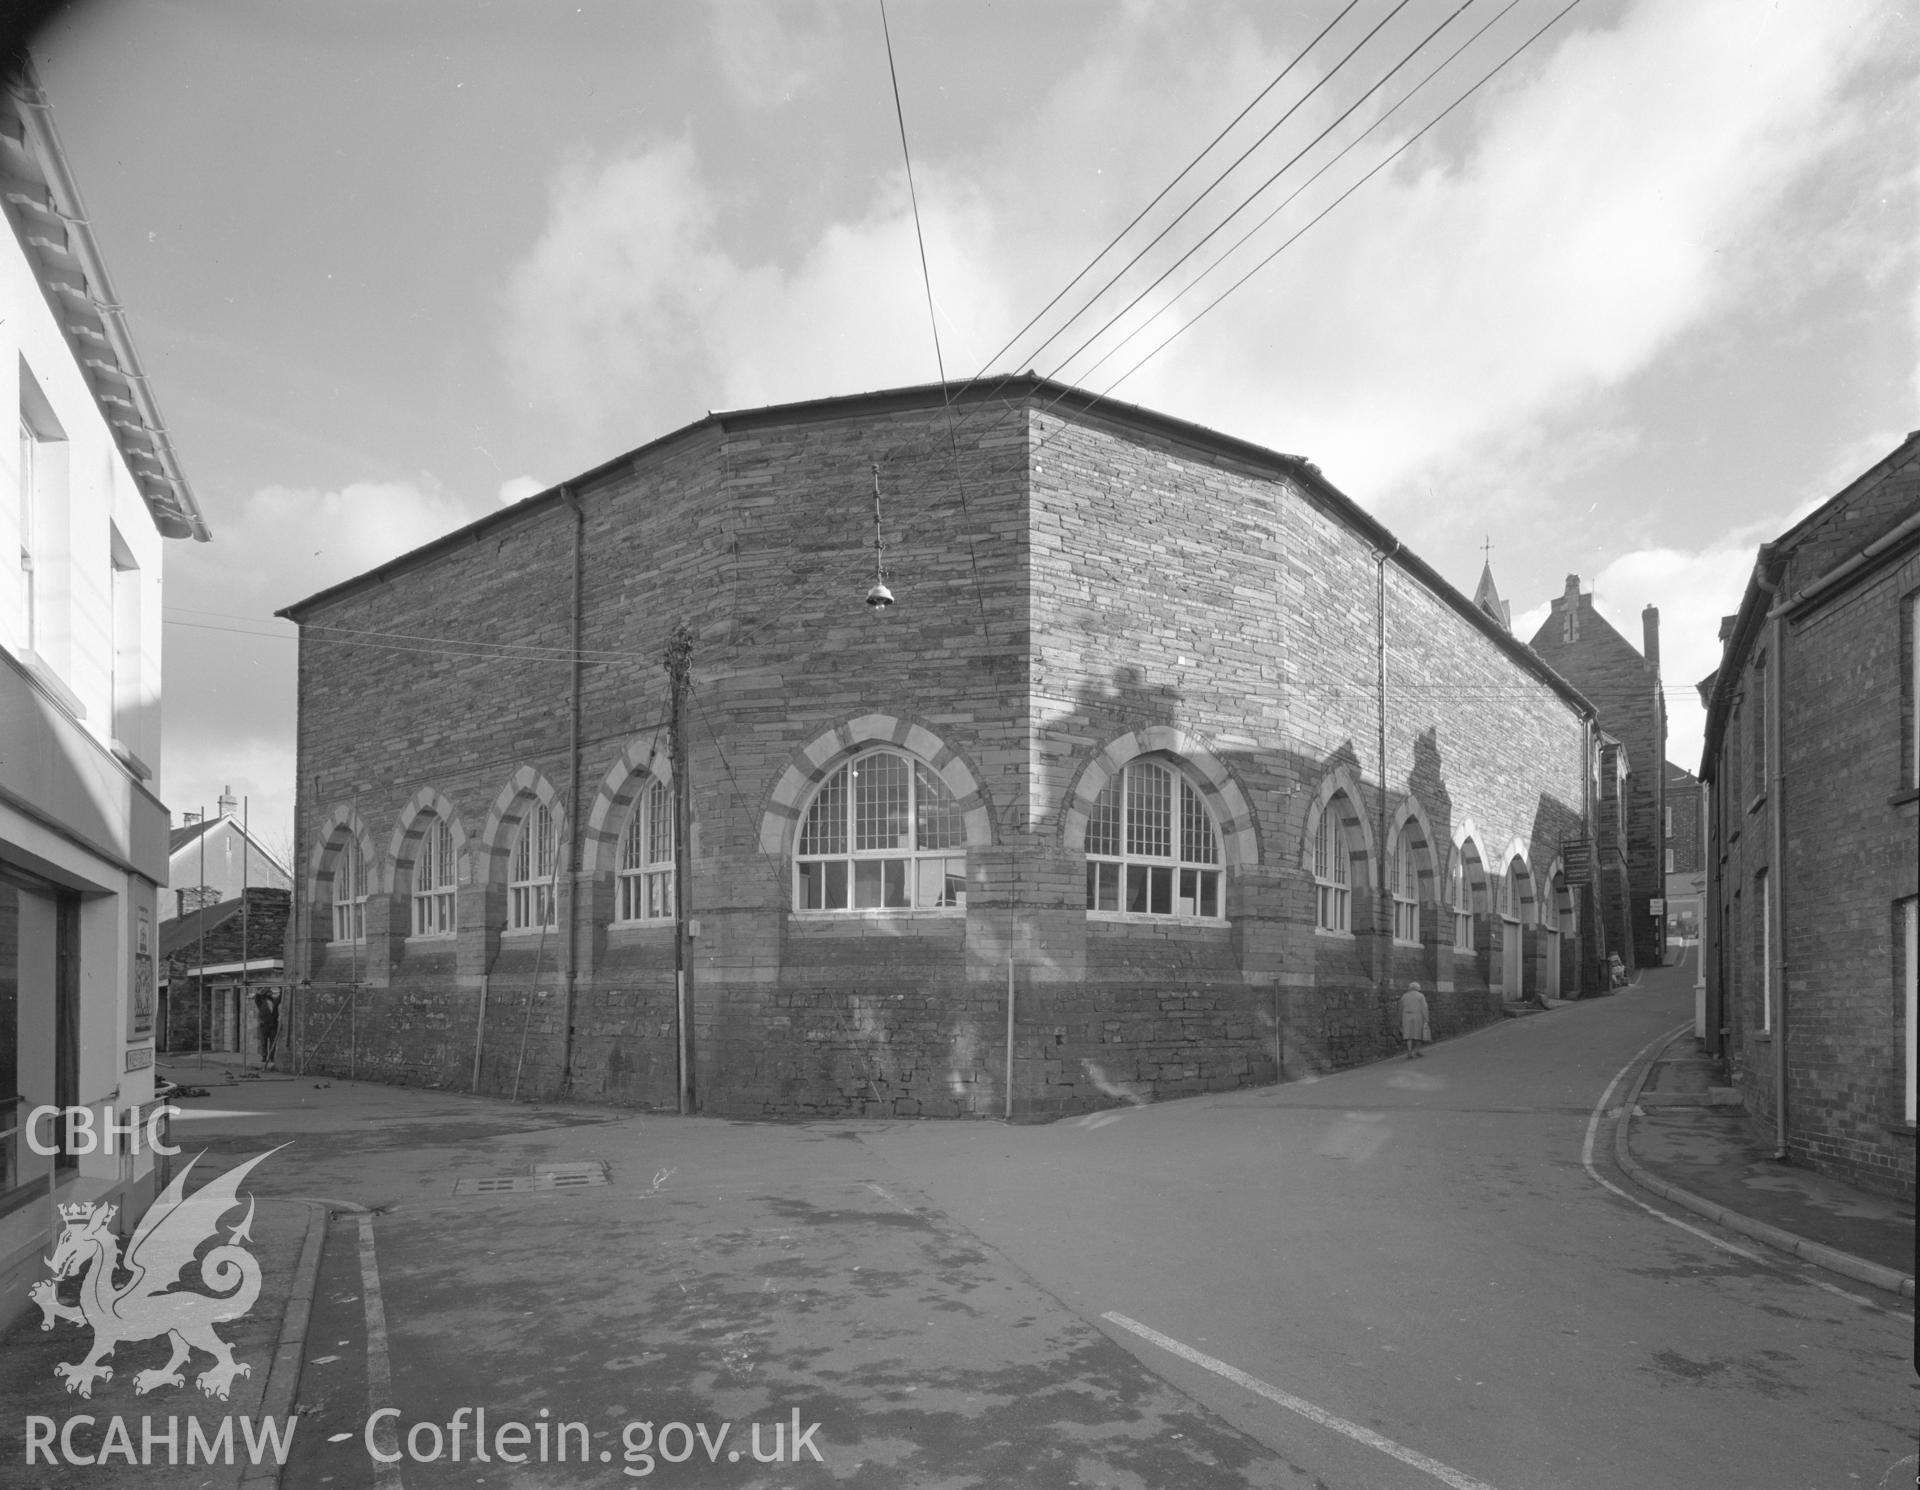 Black and white acetate negative showing exterior view of Cardigan Market Hall.